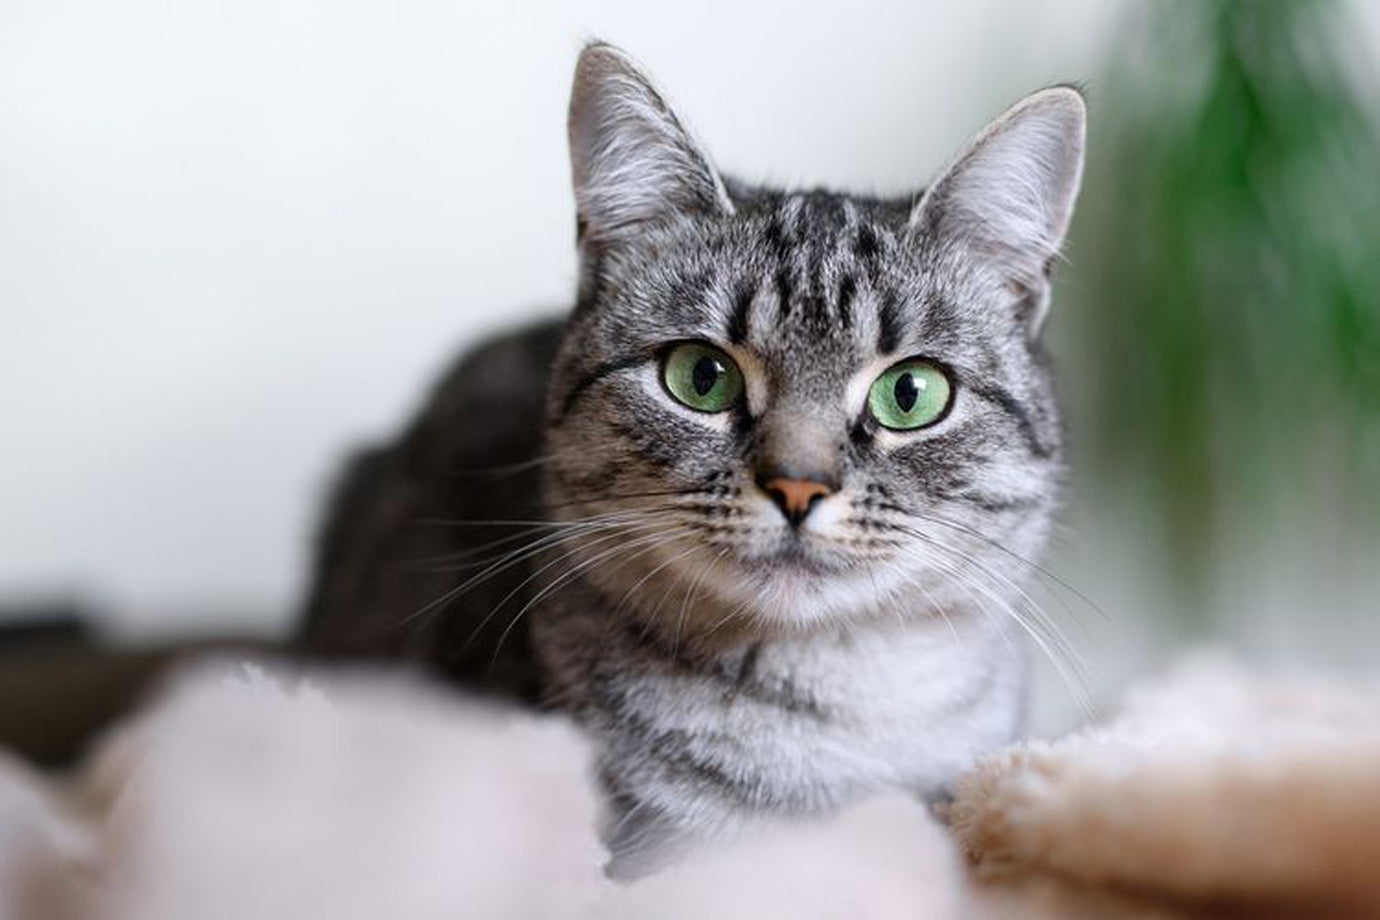 Kiddy cats: 8 child-friendly cat breeds to consider if you're looking to expand your family